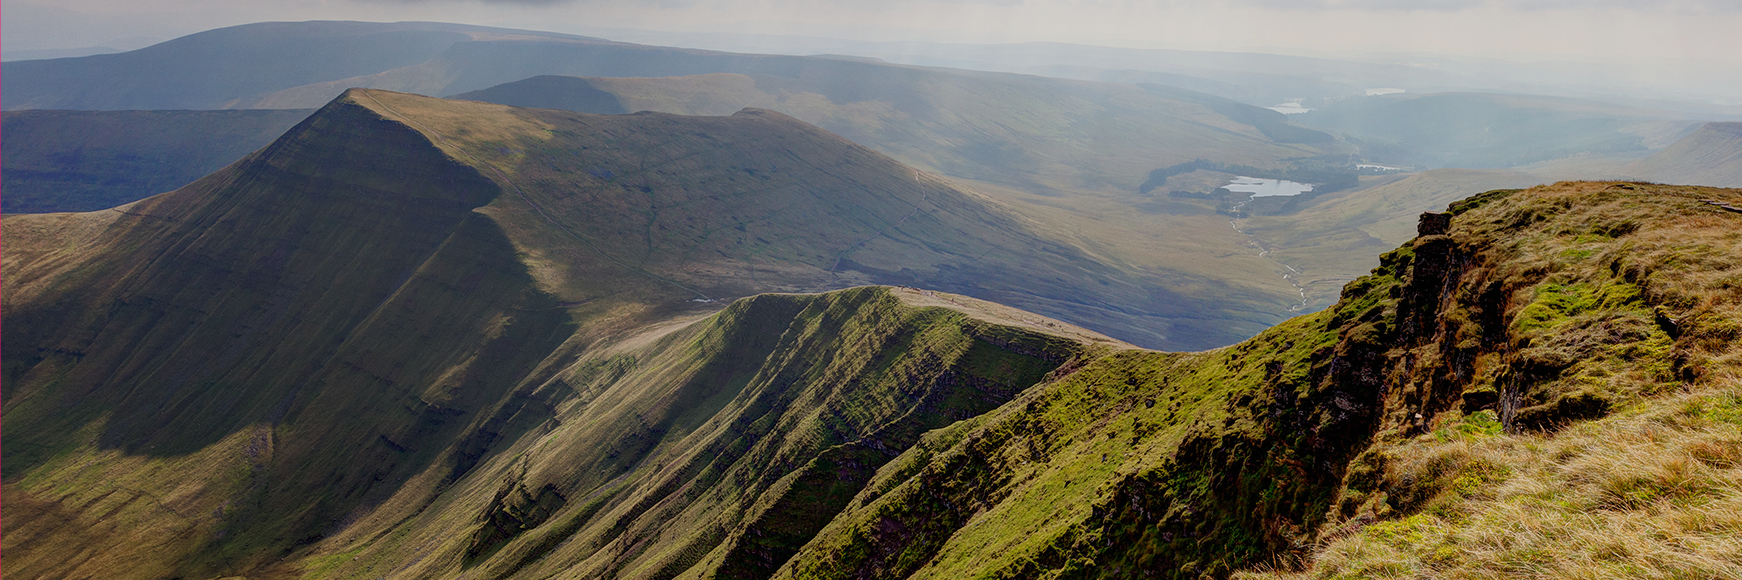 Banner image for Two day hike: Brecon Beacons banner image